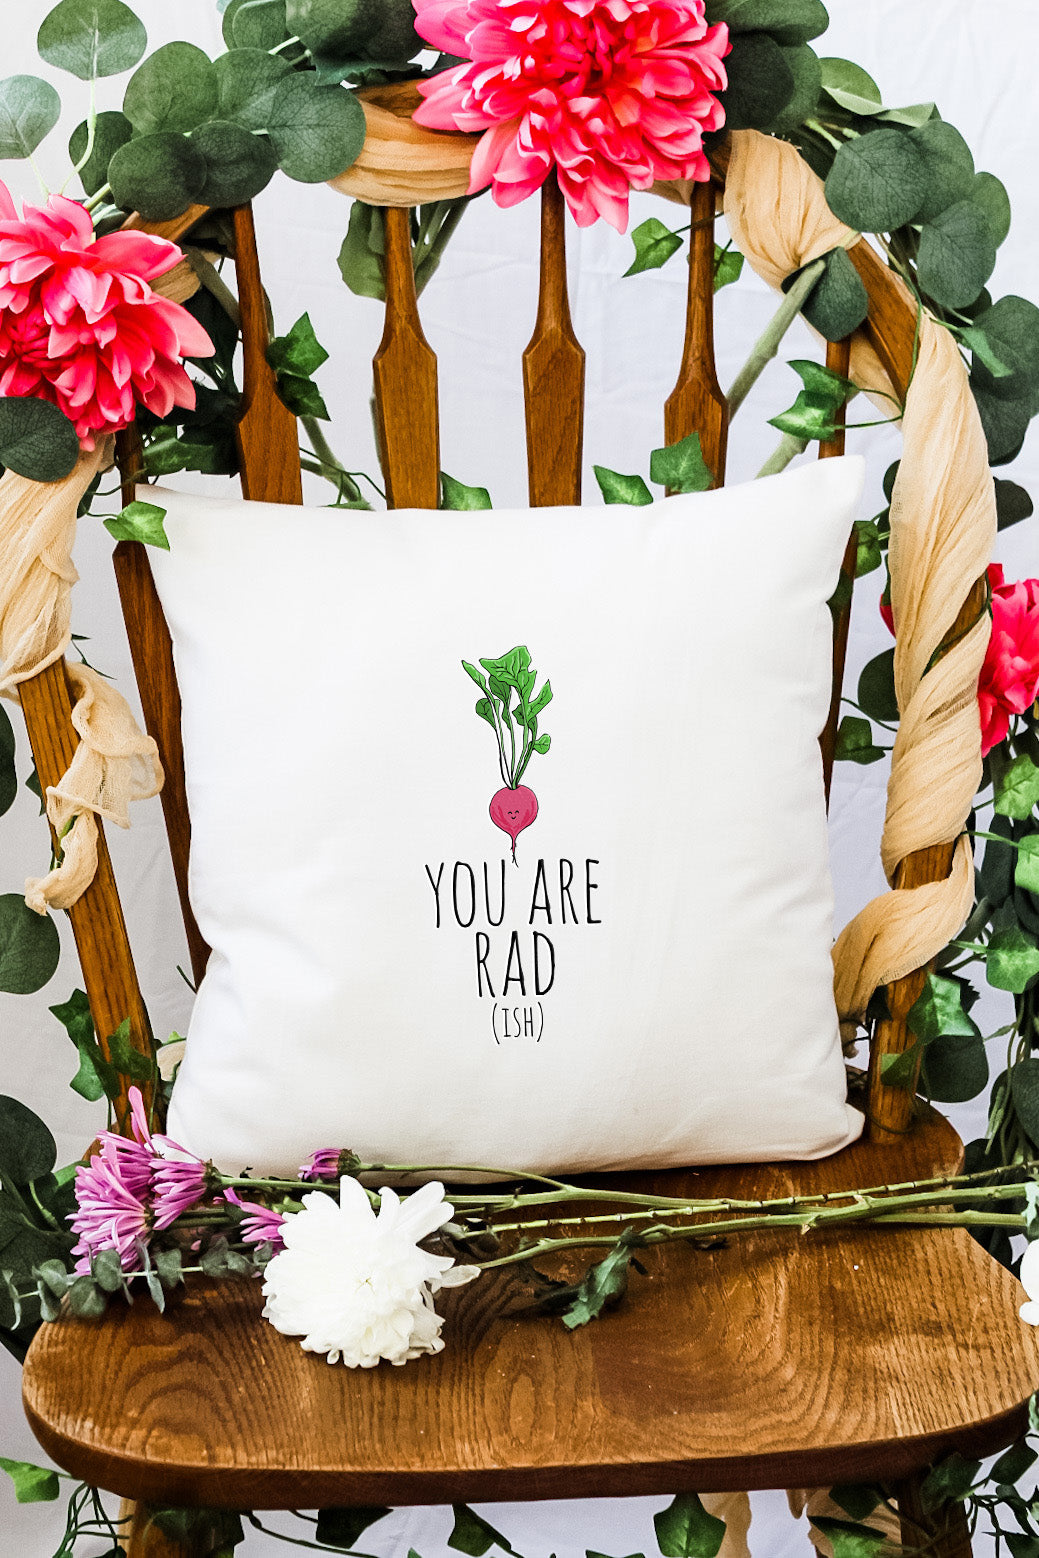 You Are Rad (ish) - Decorative Throw Pillow - MoonlightMakers